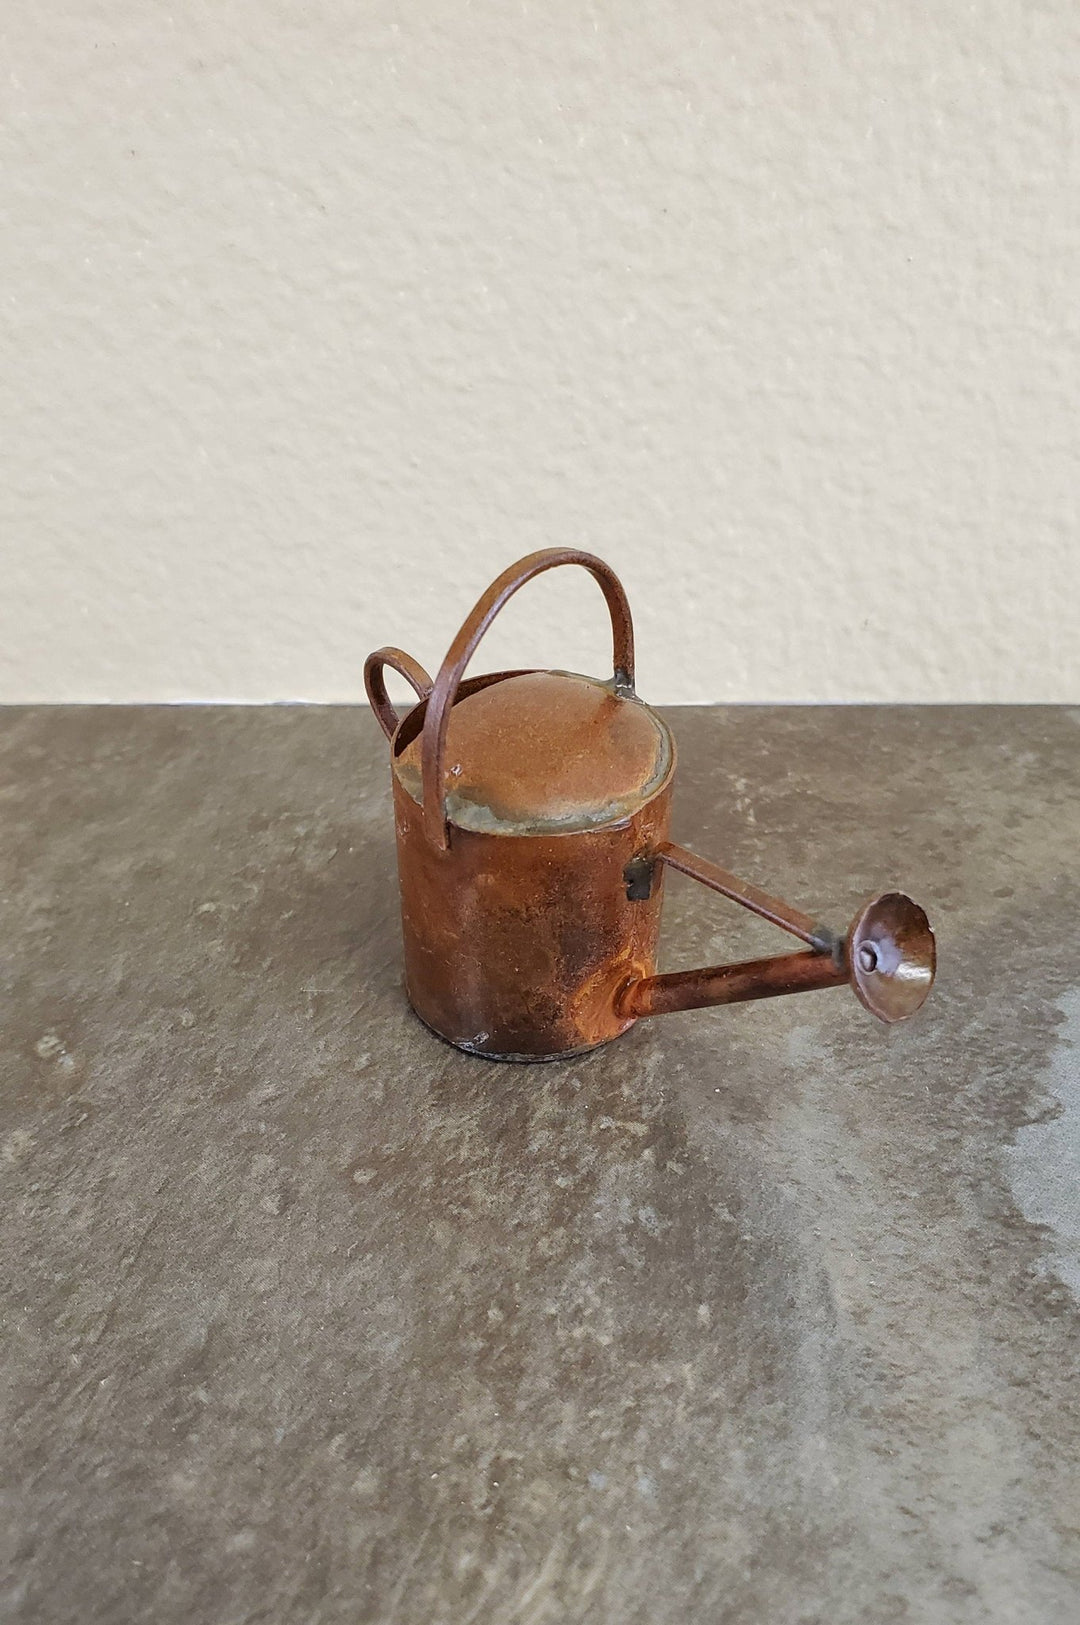 Dollhouse Miniature Large Metal Watering Can with Handle Rusted Aged 1:6 Scale Garden - Miniature Crush